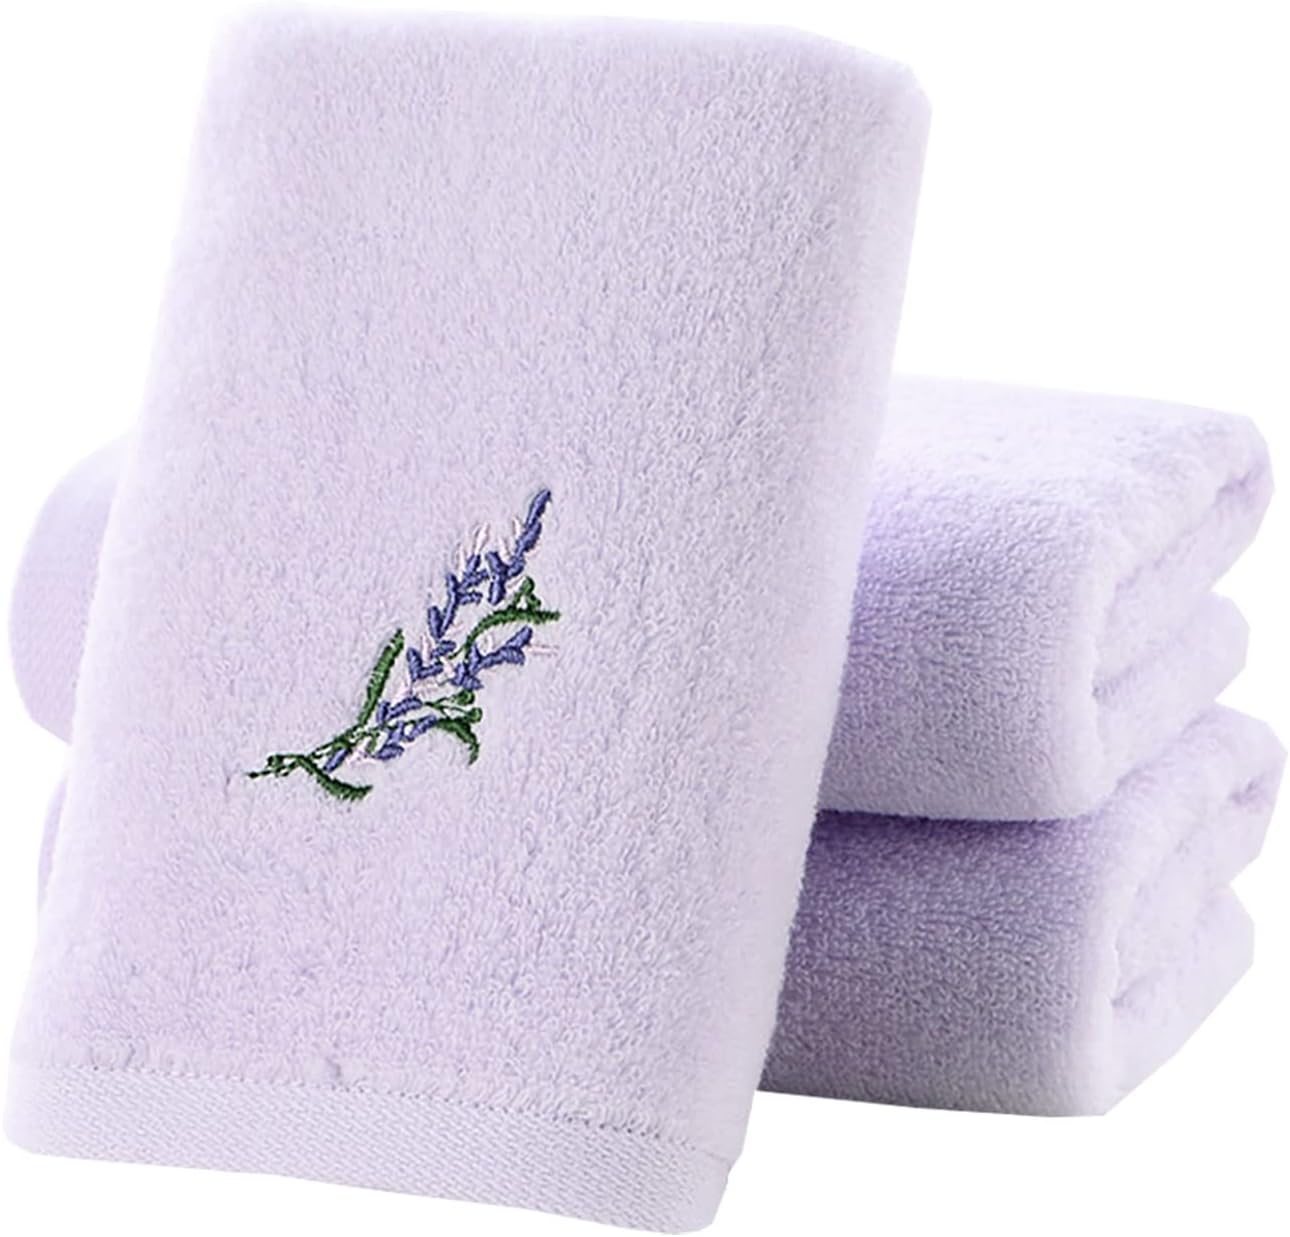 These towels are surprisingly thick. The design is well-embroidered. The size is a bit longer and skinnier than normal, but these towels do the job. I am used to using pretty cheap and thin hand towels, and these feel like an upgrade.